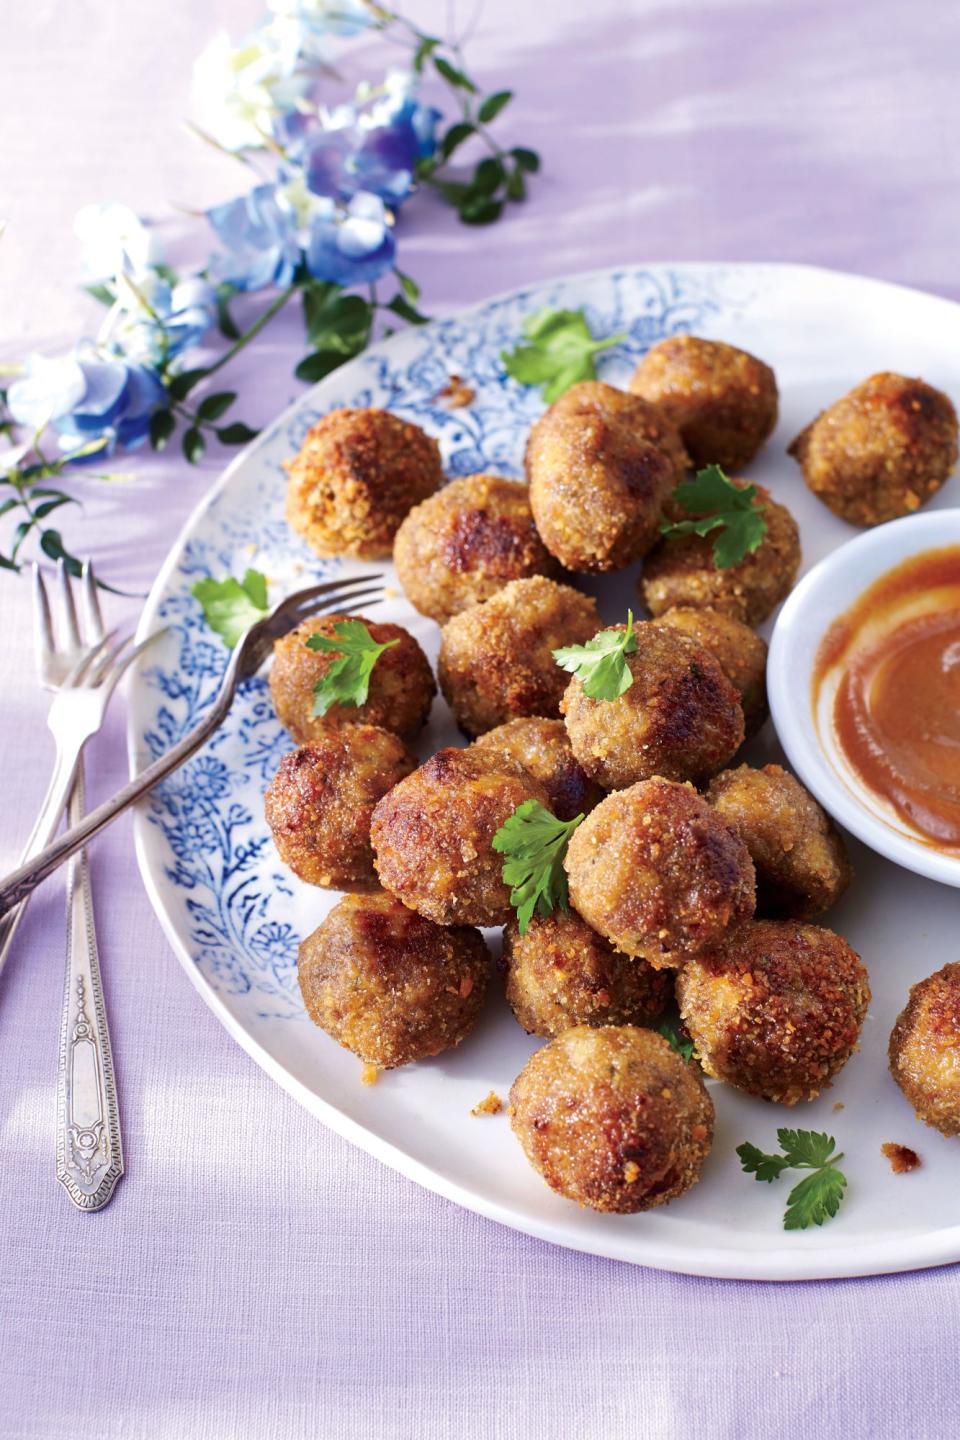 Breakfast Sausage Meatballs with Apple Butter Dipping Sauce